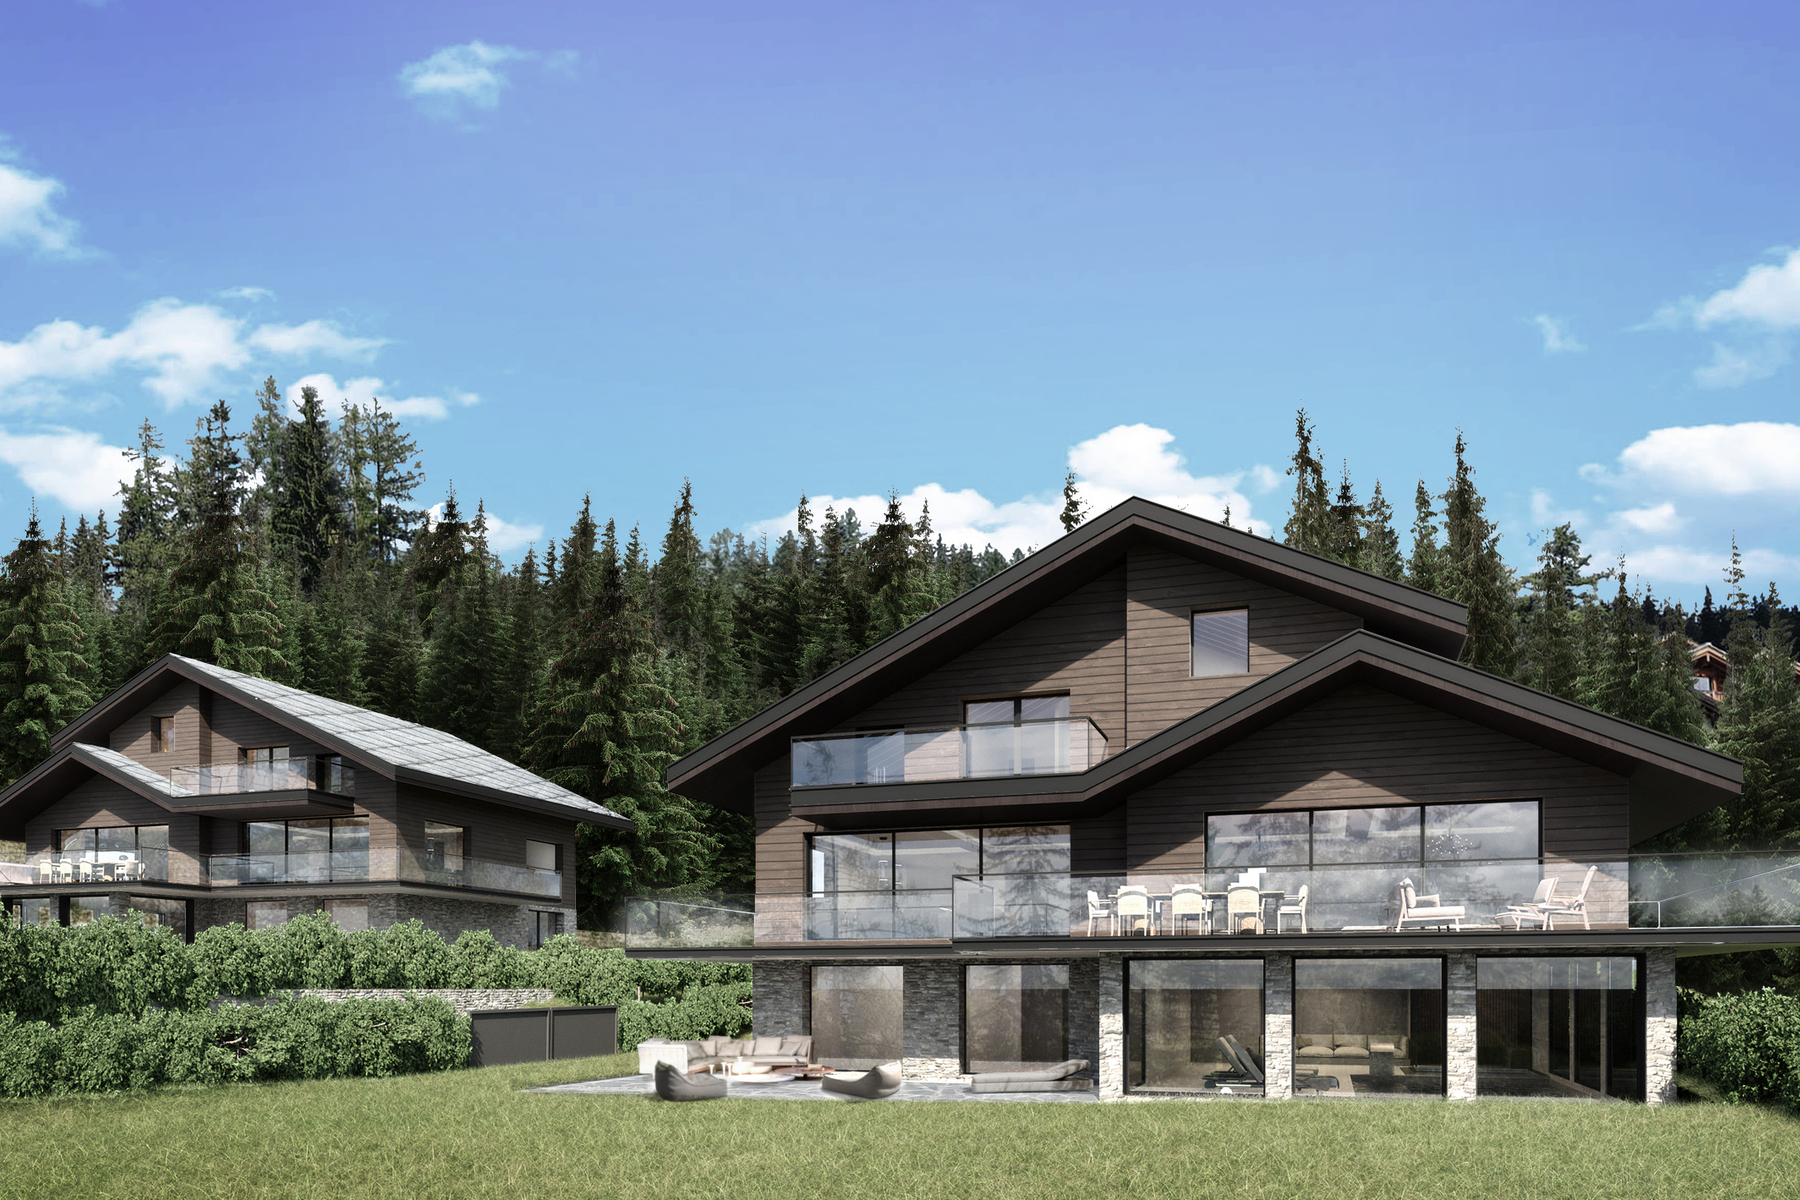 New chalets to build near the golf course and Miriouges